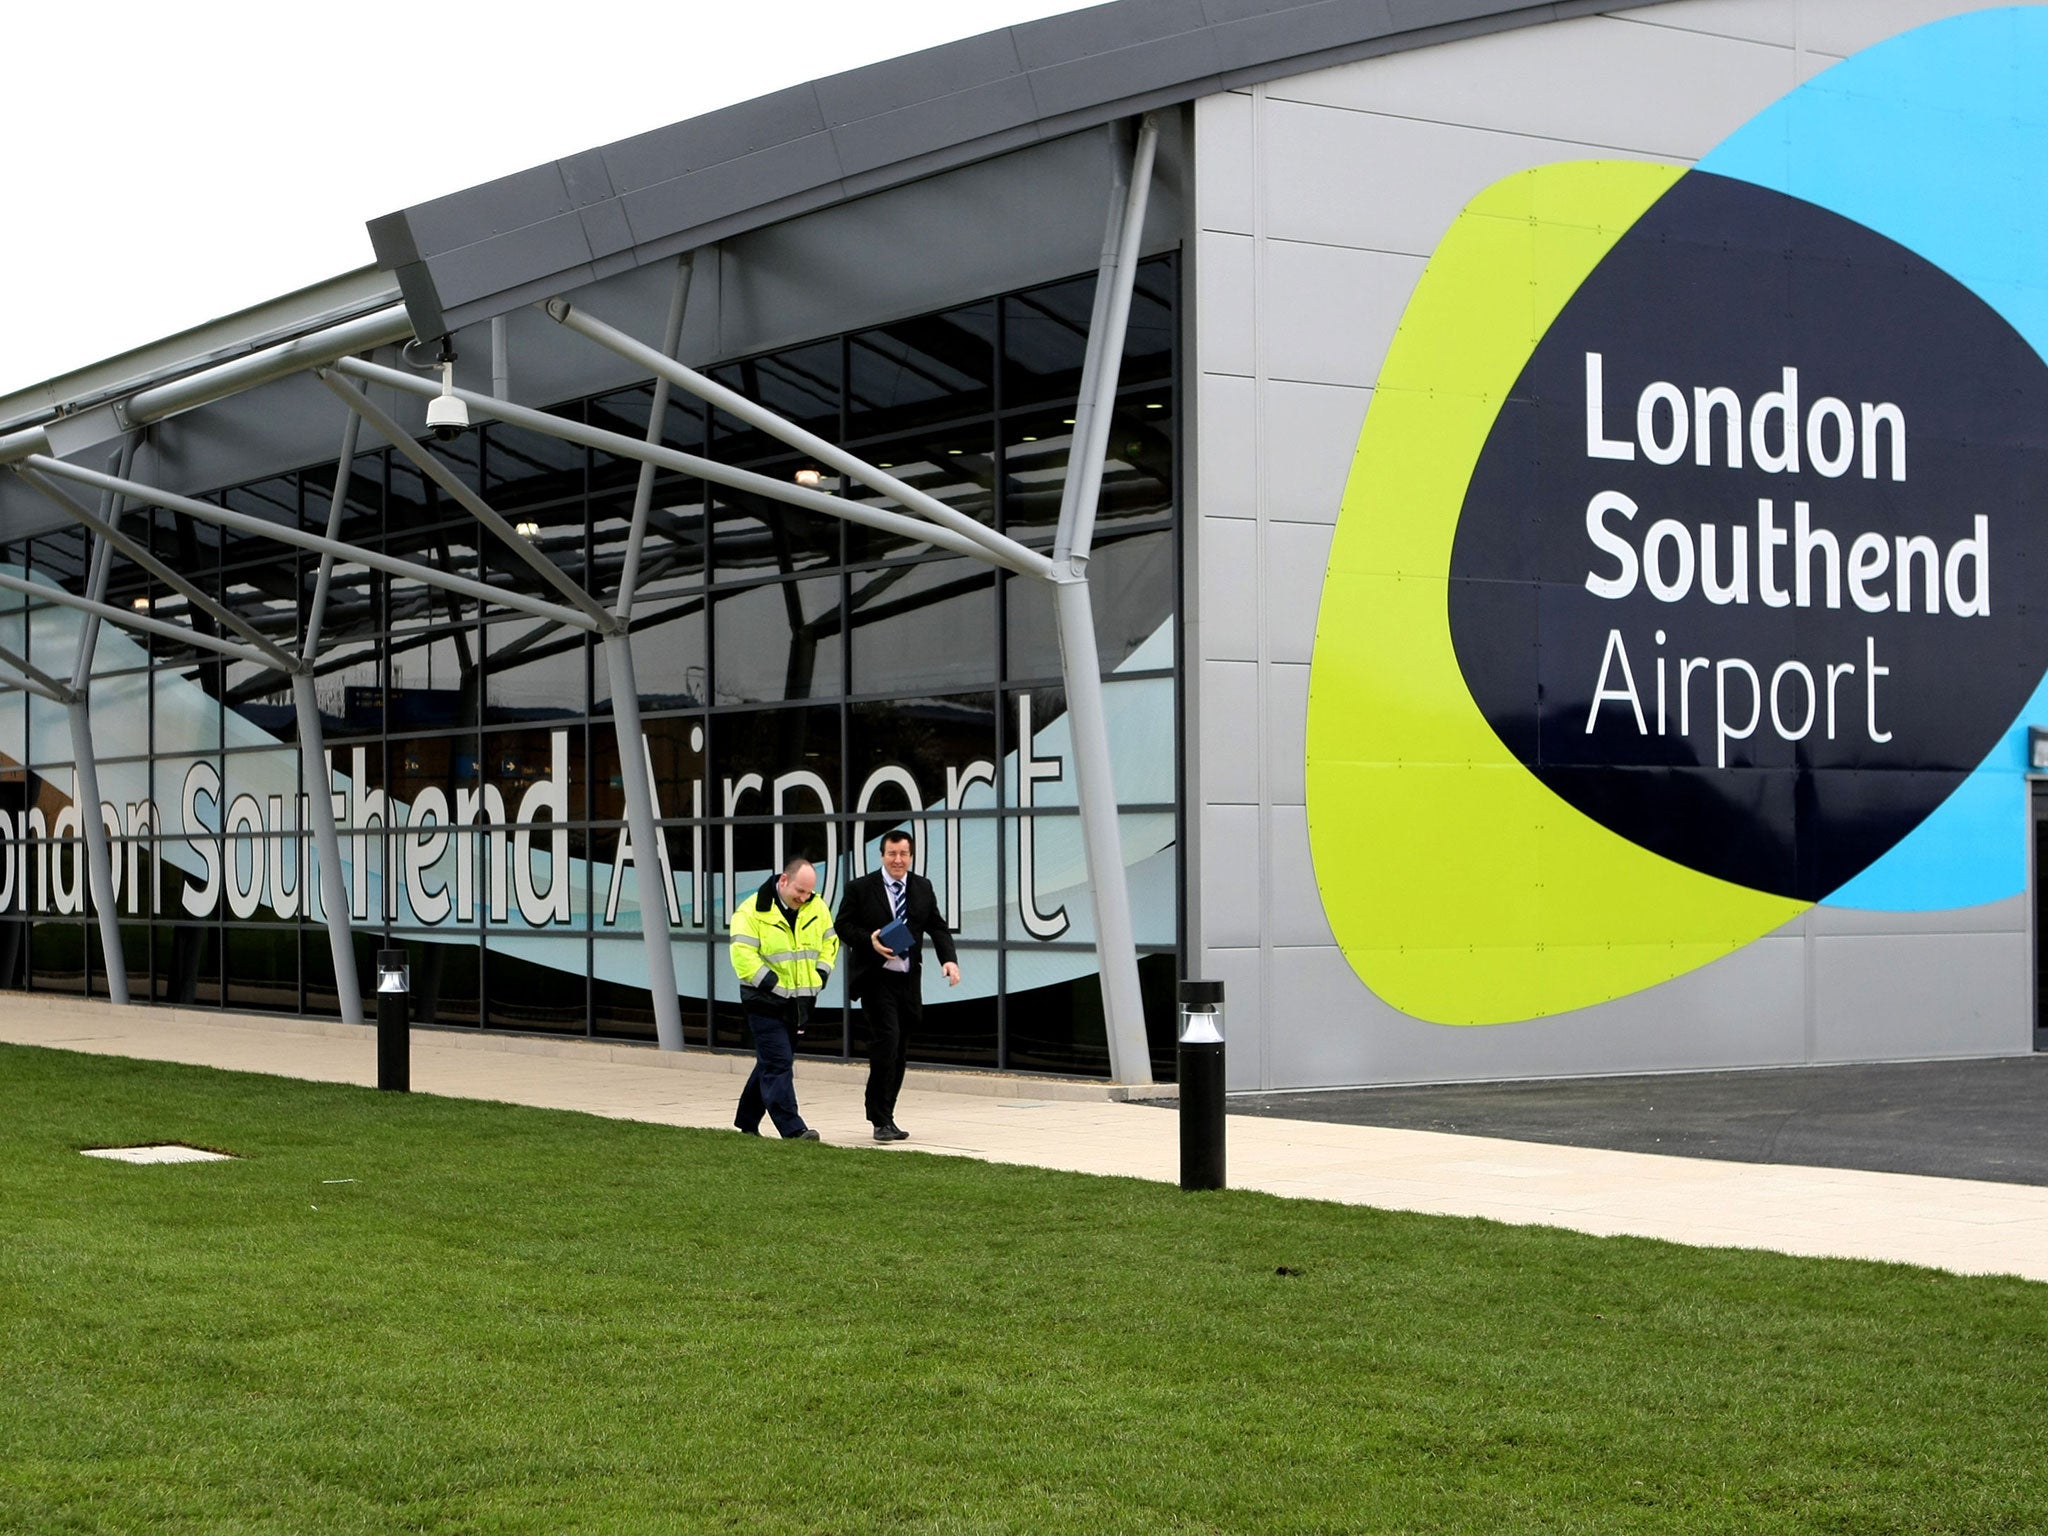 Room for expansion: Southend Airport currently handles just over 1 million passengers a year, compared with 78 million at Heathrow